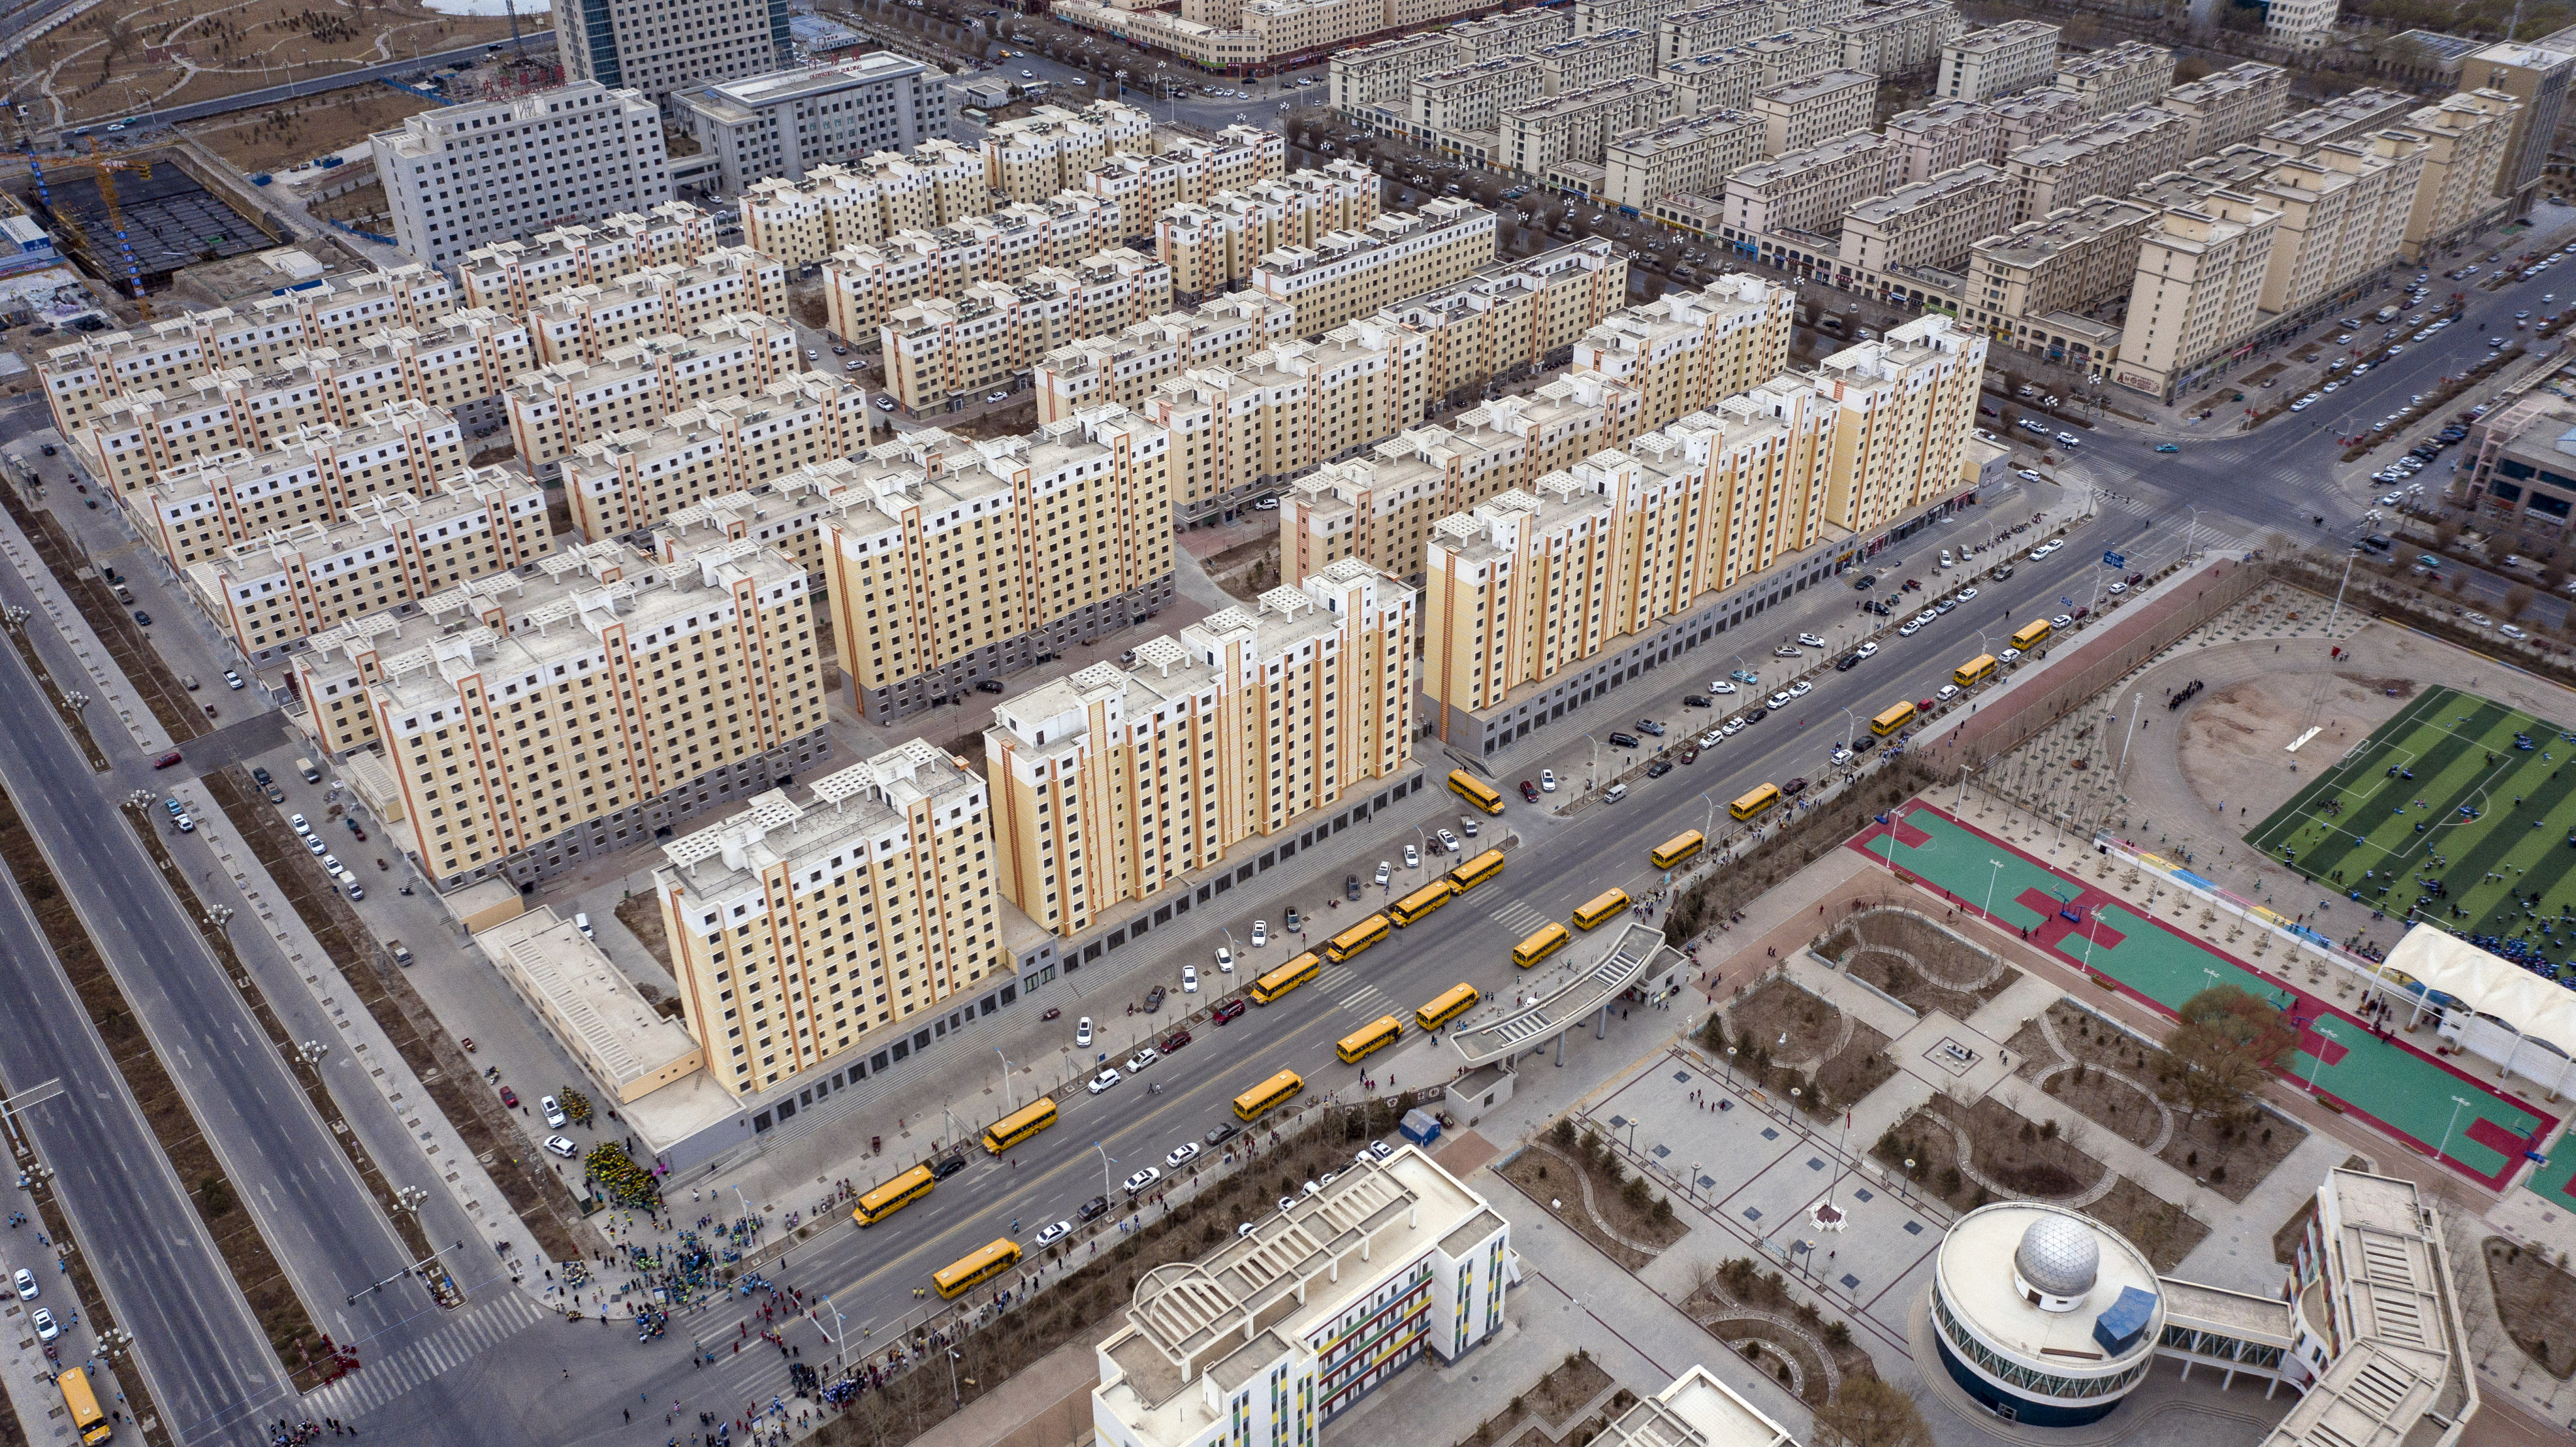 Residential buildings in Yumen, Gansu province, on March 31. While China is expected to approve plans for a nationwide property tax, its roll-out is expected to be graduate with several pilot programmes. Photo: Bloomberg